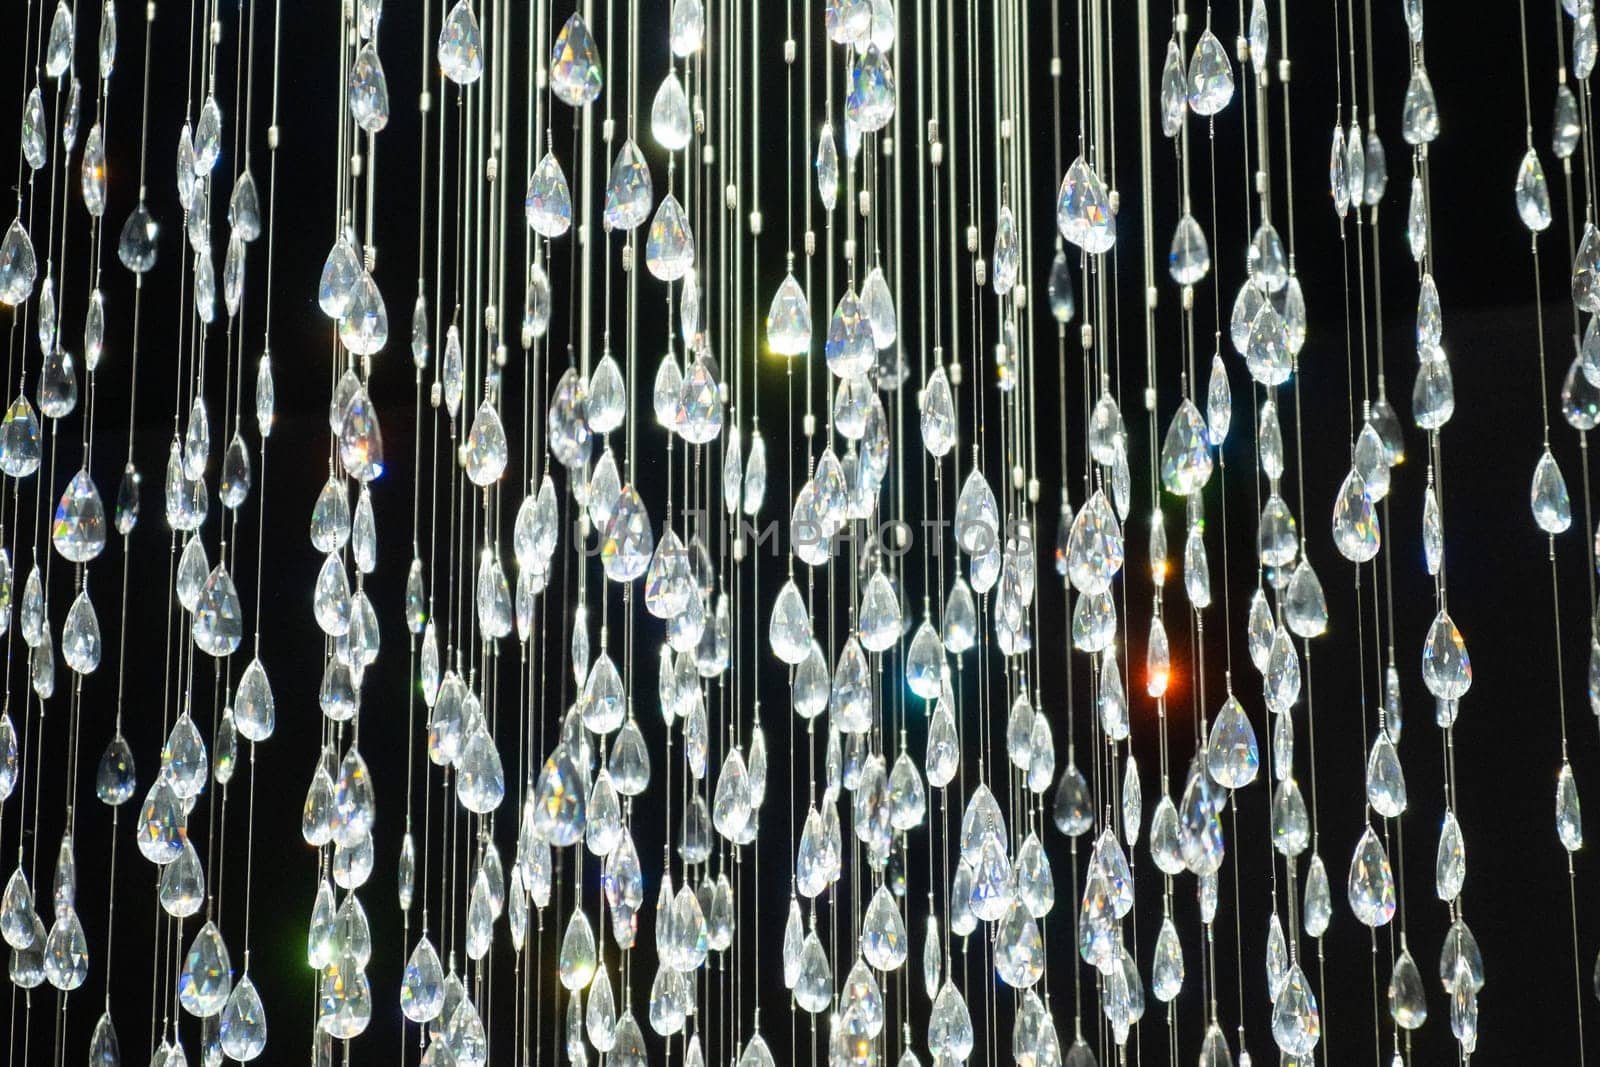 Crystal stones dangle and glisten on black background. Shining crystal chandelier.